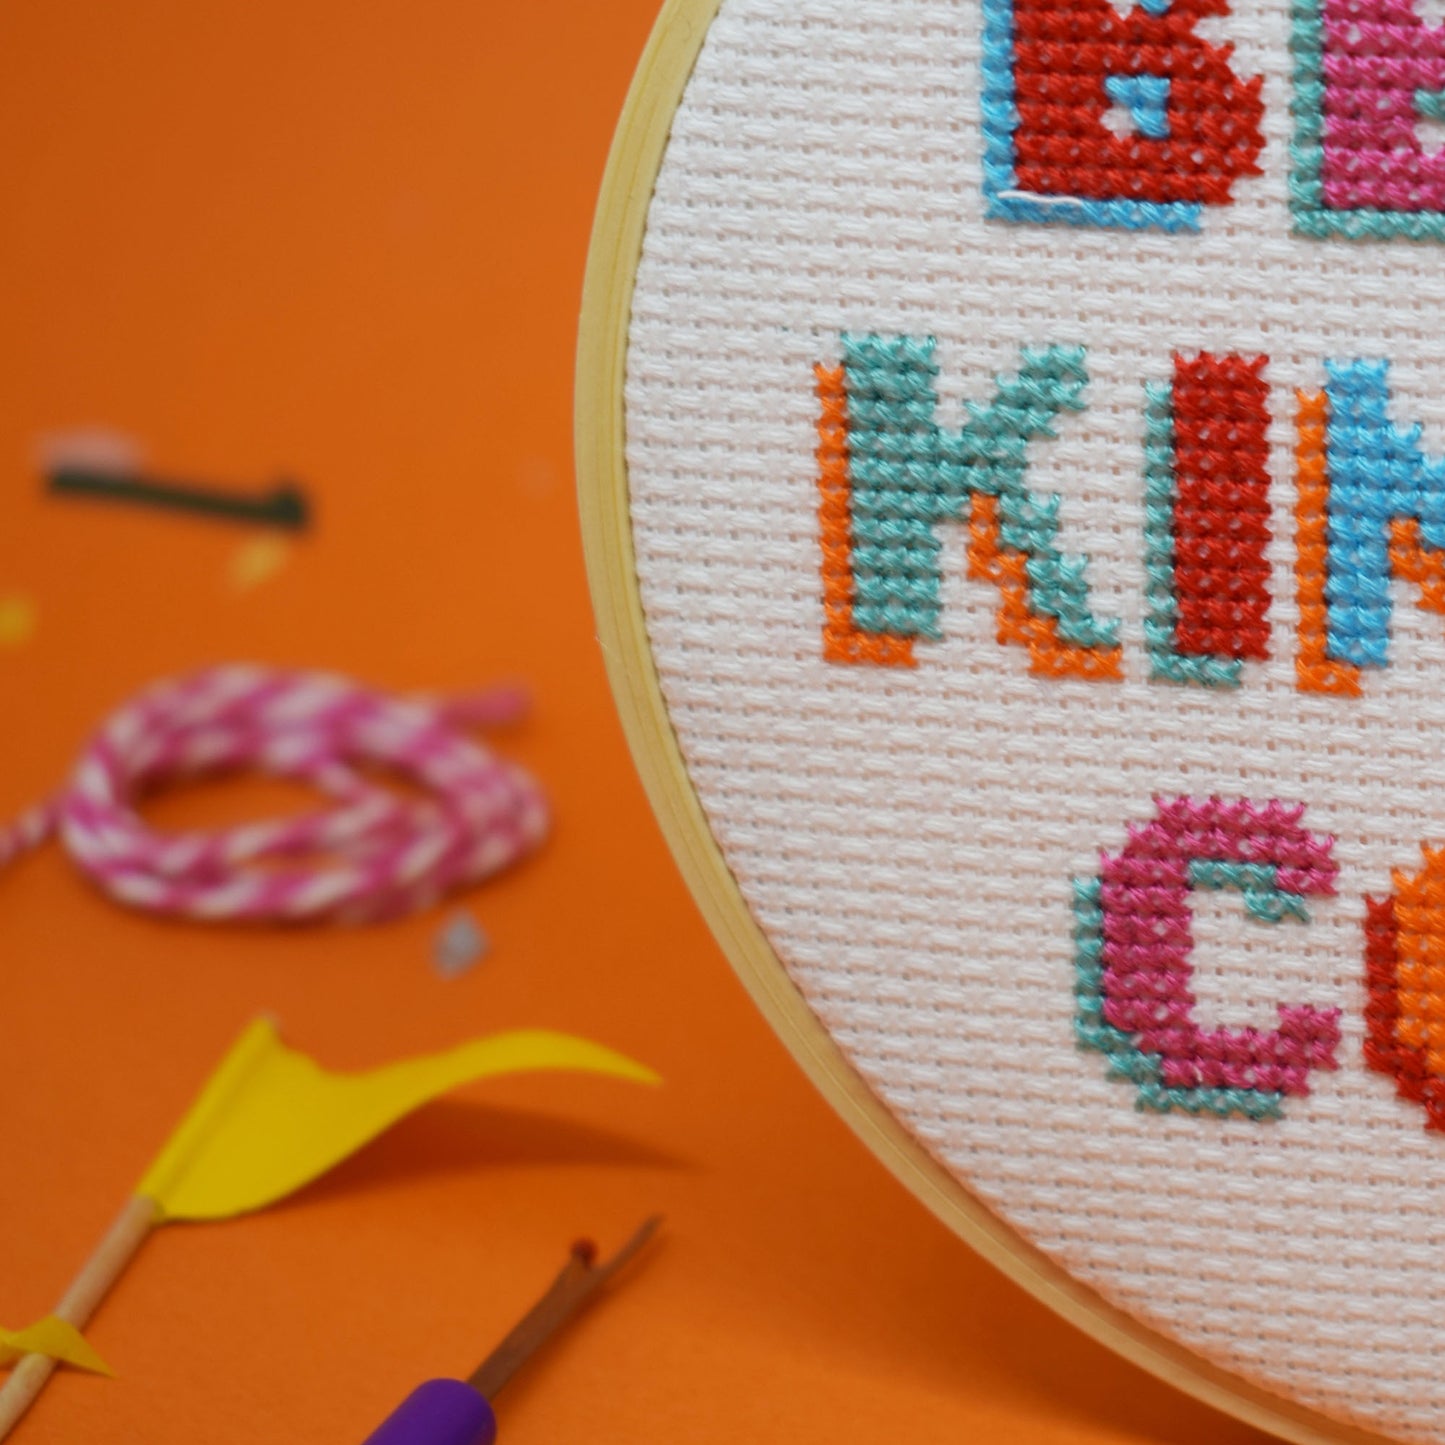 'Being Kind is Cool' Large Cross Stitch Kit